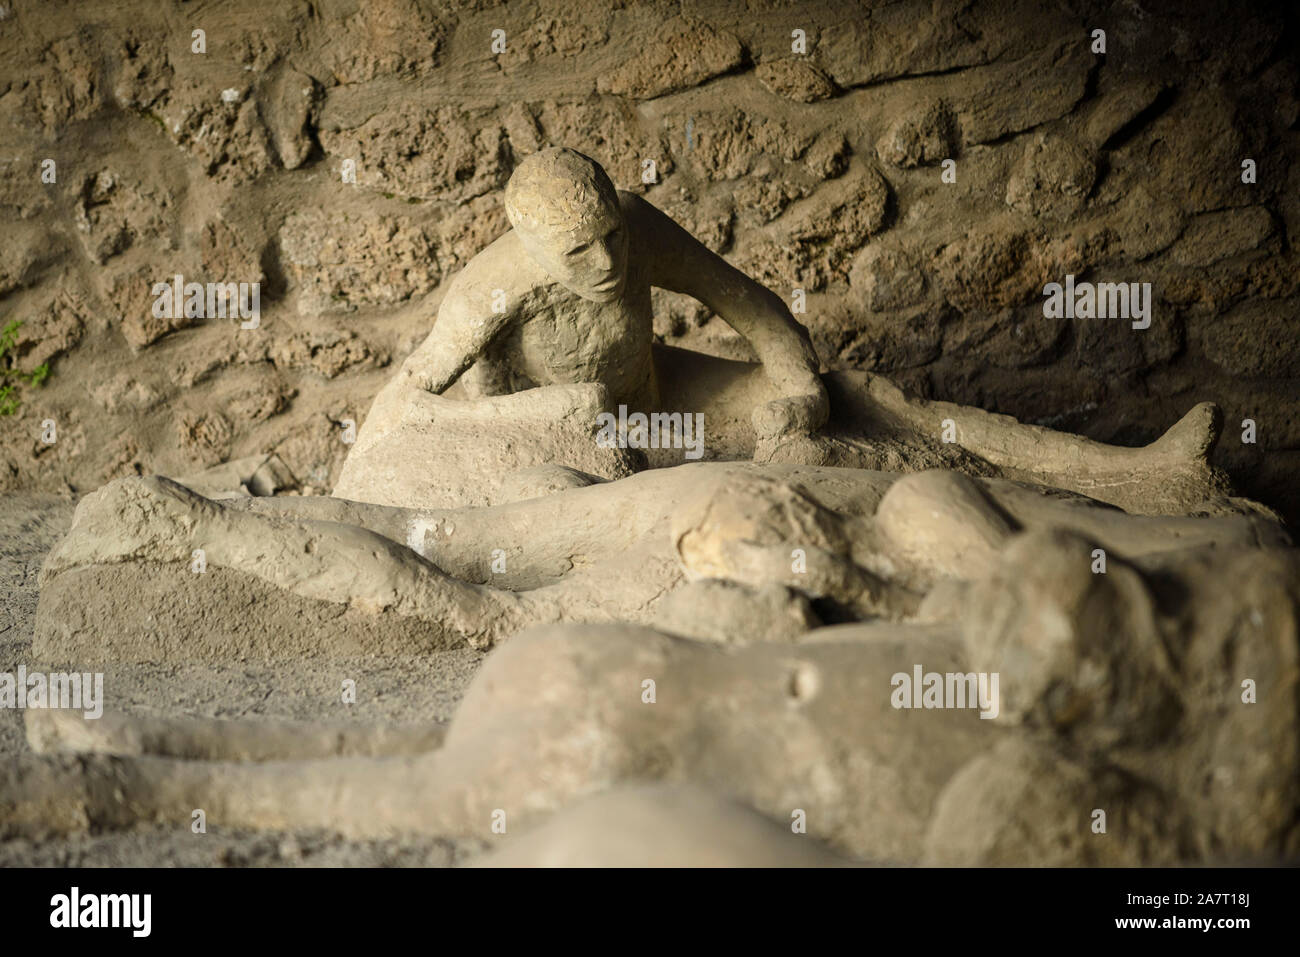 Pompei. Italy. Archaeological site of Pompeii. Orto dei Fuggiaschi / Garden of the Fugitives, plaster casts of bodies of people who died as they tried Stock Photo